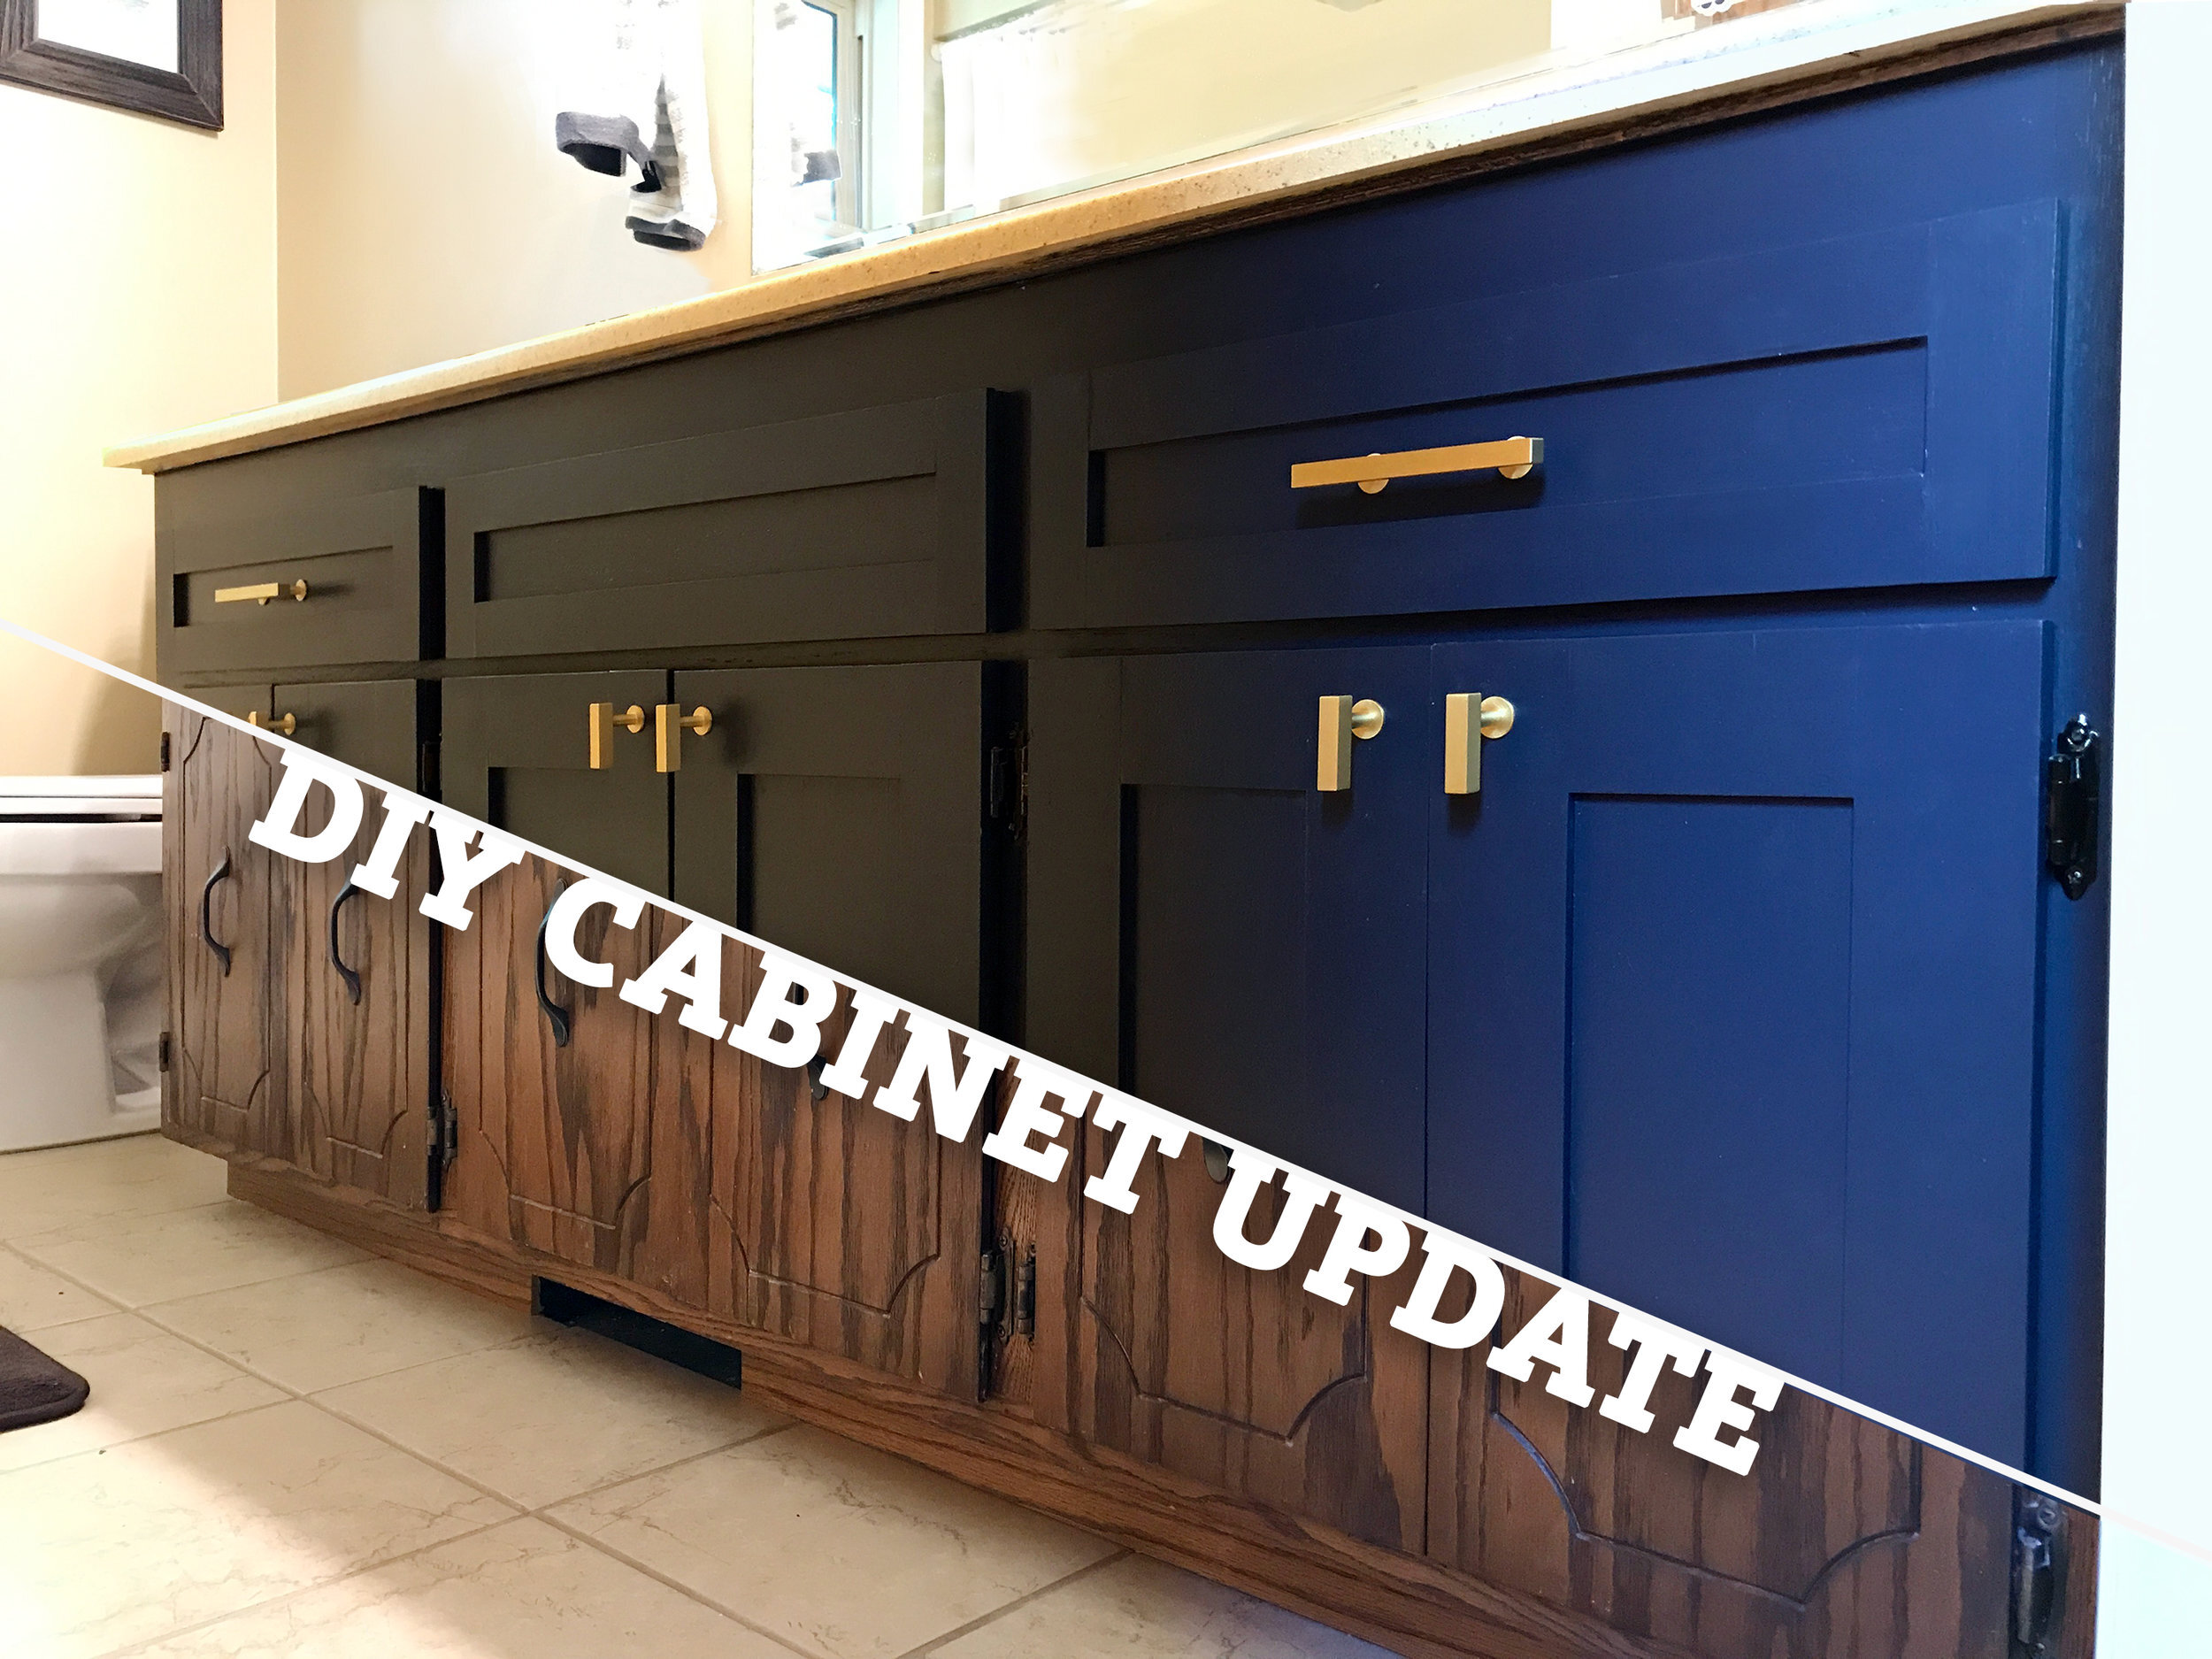 Replacing Outdated Cabinet Hinges? - The Hardware Hut